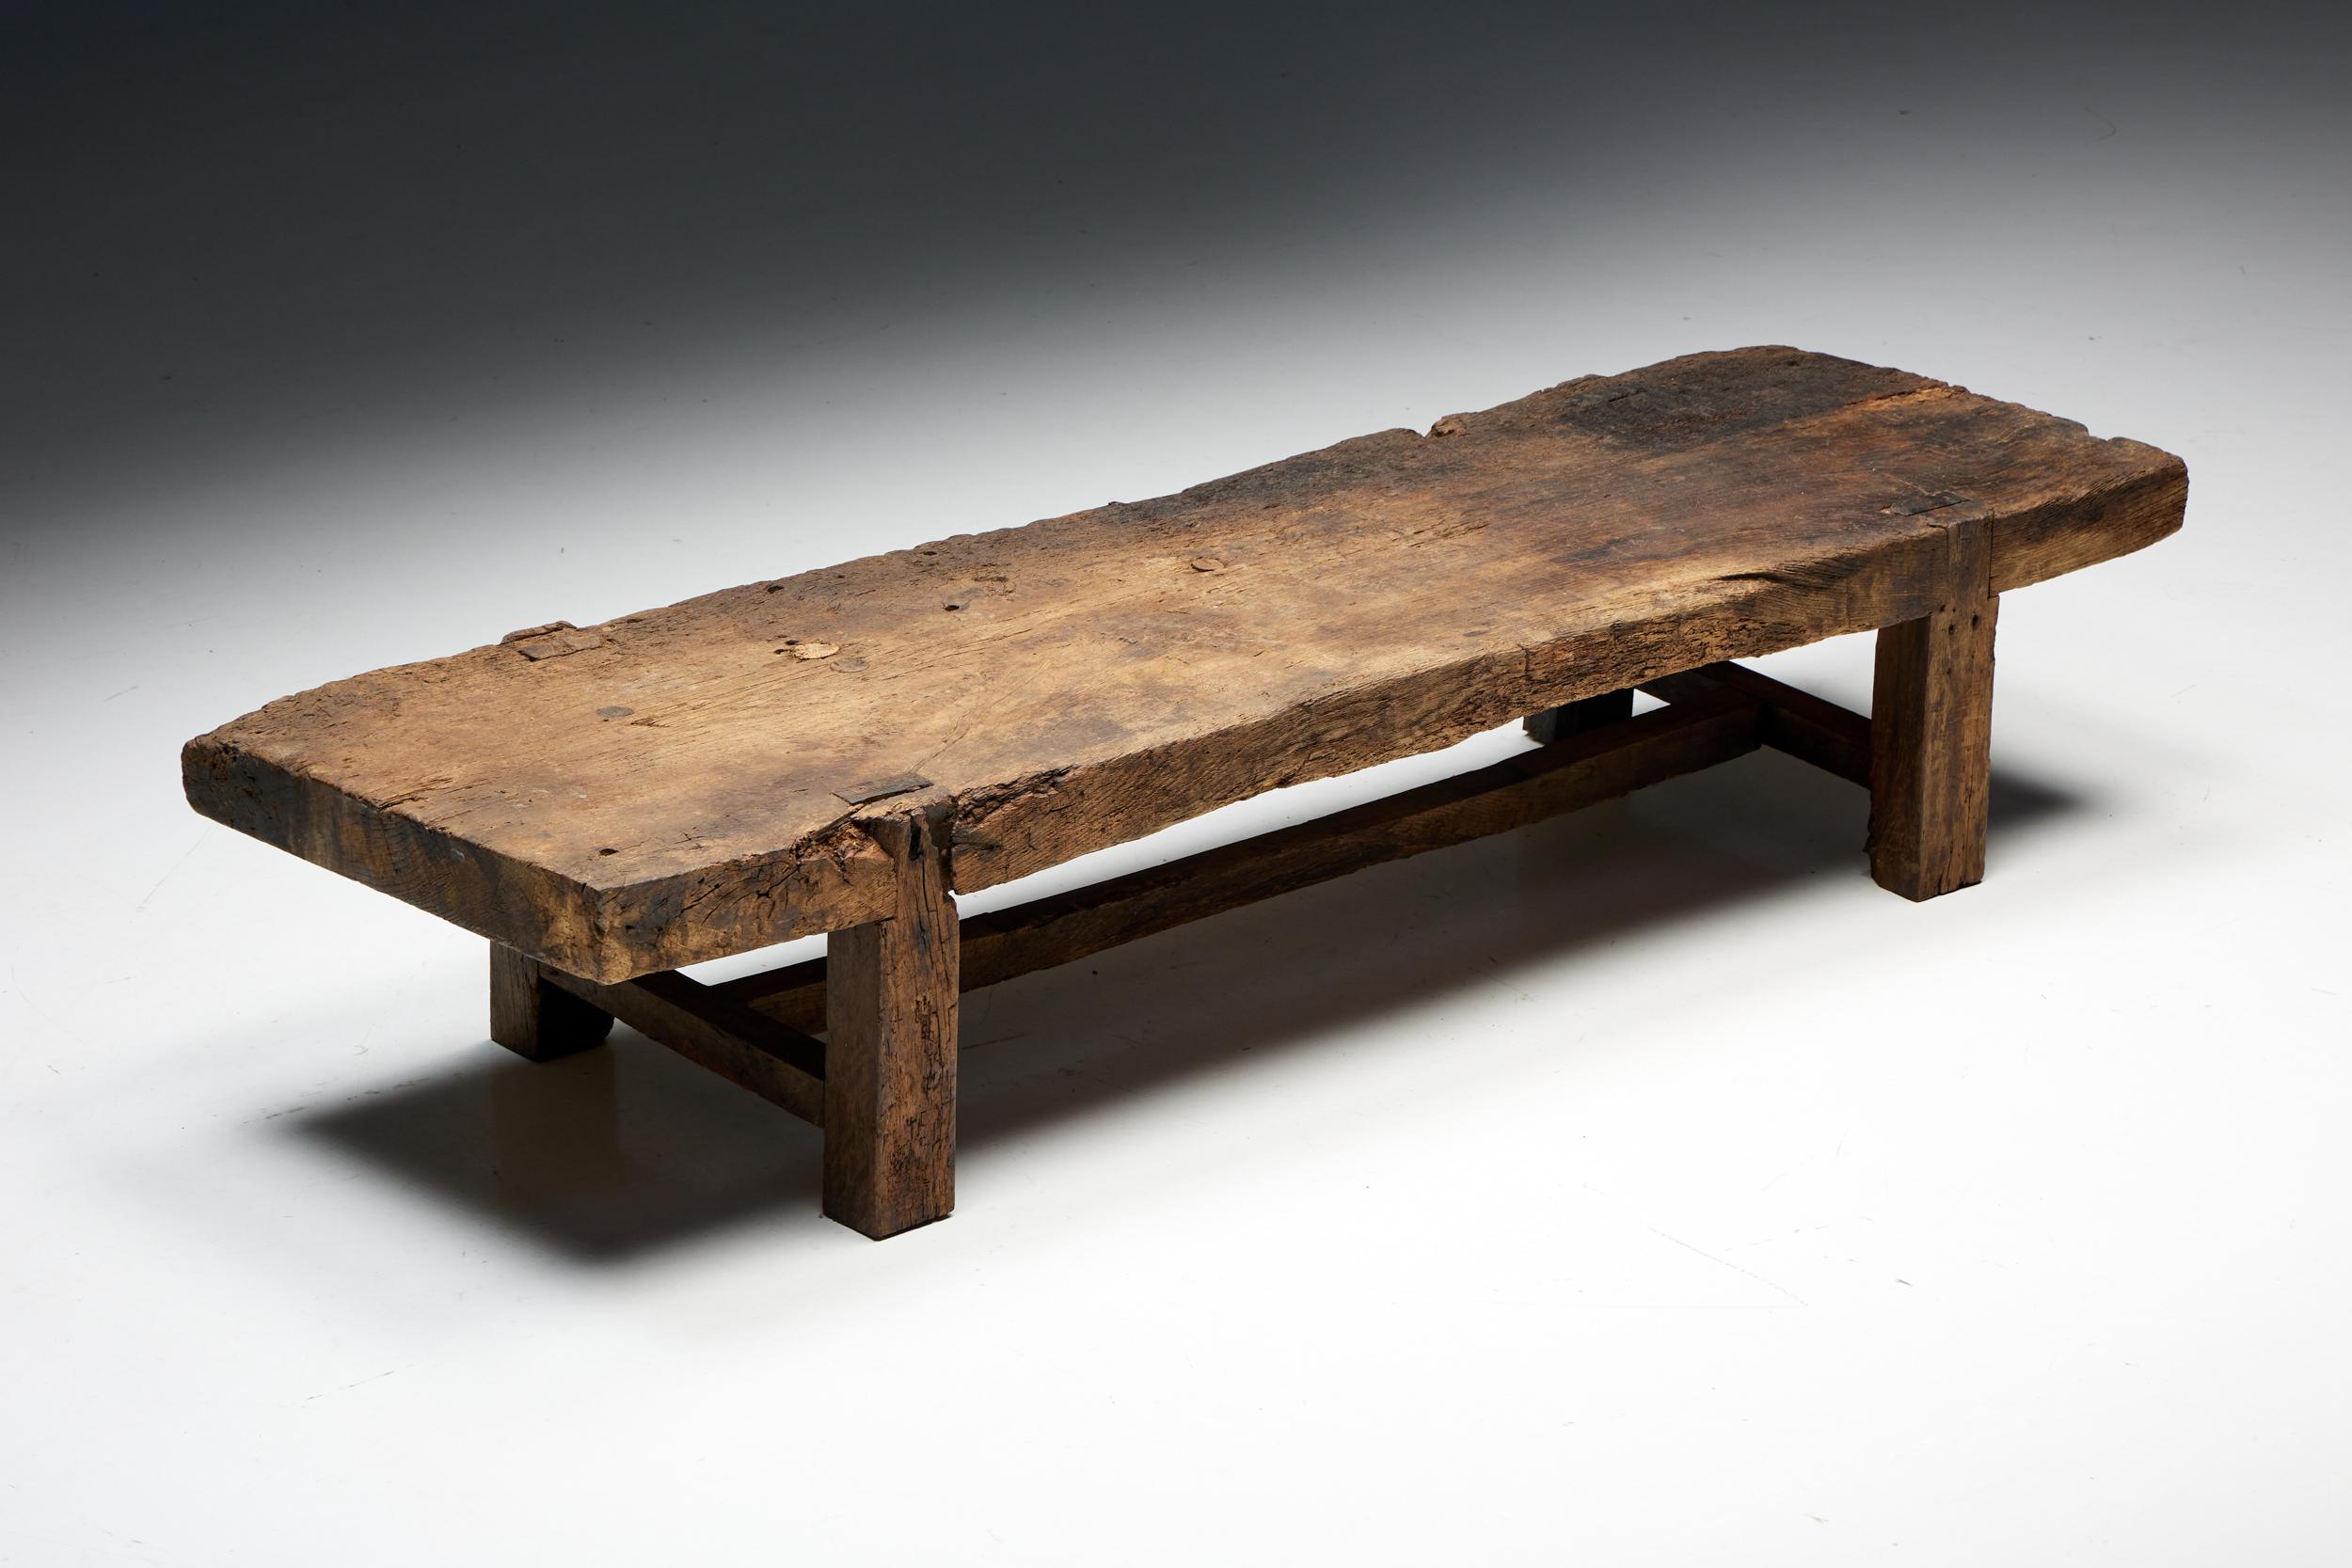 Primitive; Monoxylite; Rustic; Coffee Table; Wood; Wabi Sabi; Folk Art; Side Table; Patina; Wood; 1950s; Early 20th century; 

Primitive Rustic Rectangle Coffee Table - a timeless piece that captures the essence of the wabi-sabi style. Crafted